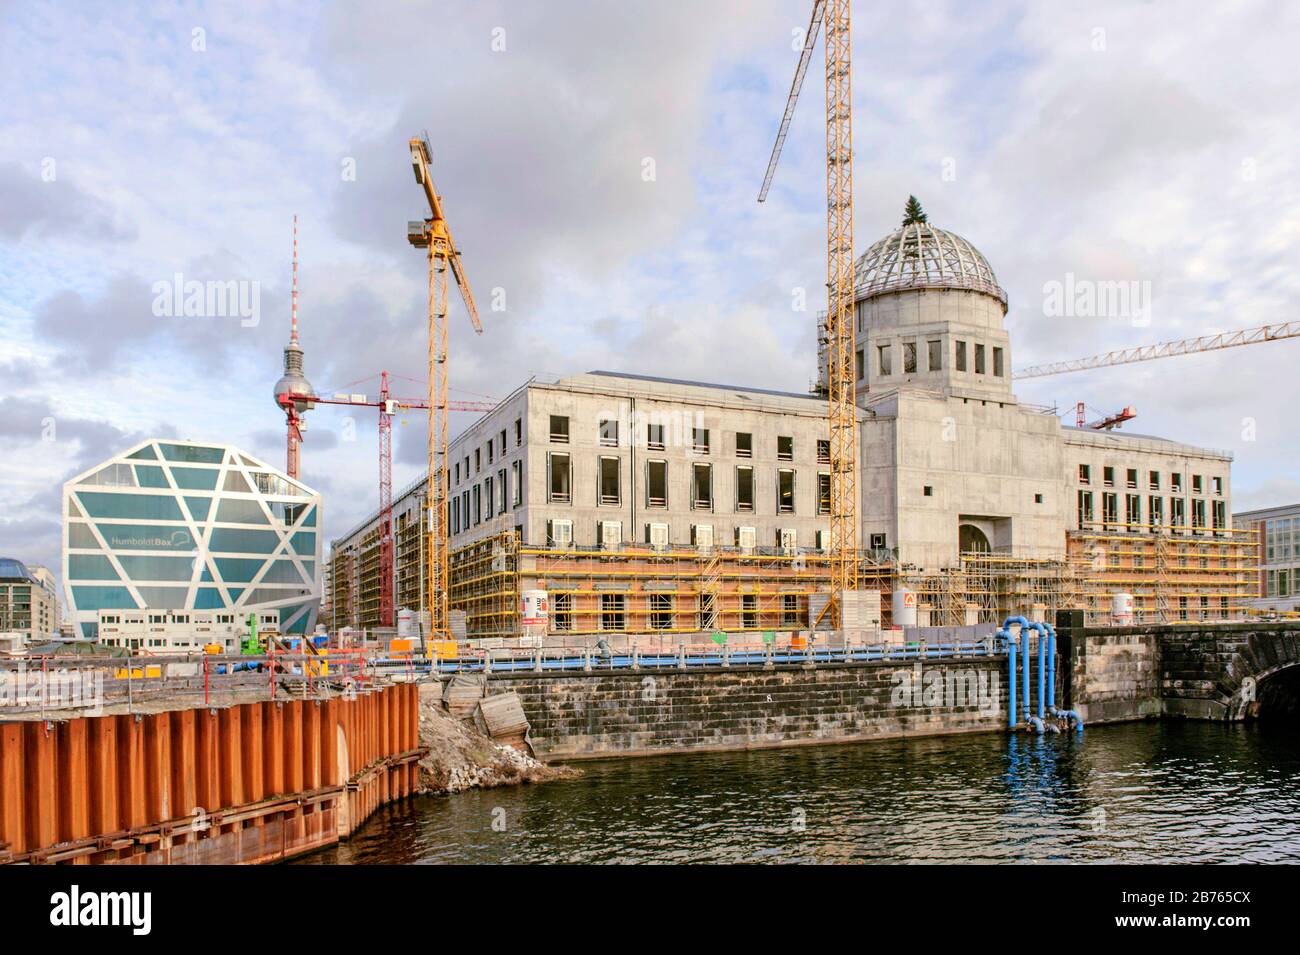 Germany, Berlin,26.12.2015. Construction site of the Berlin Palace - Humboldtforum on 26.12.2015. The Berlin Palace is the work of the Italian architect Prof. Franco Stella. [automated translation] Stock Photo